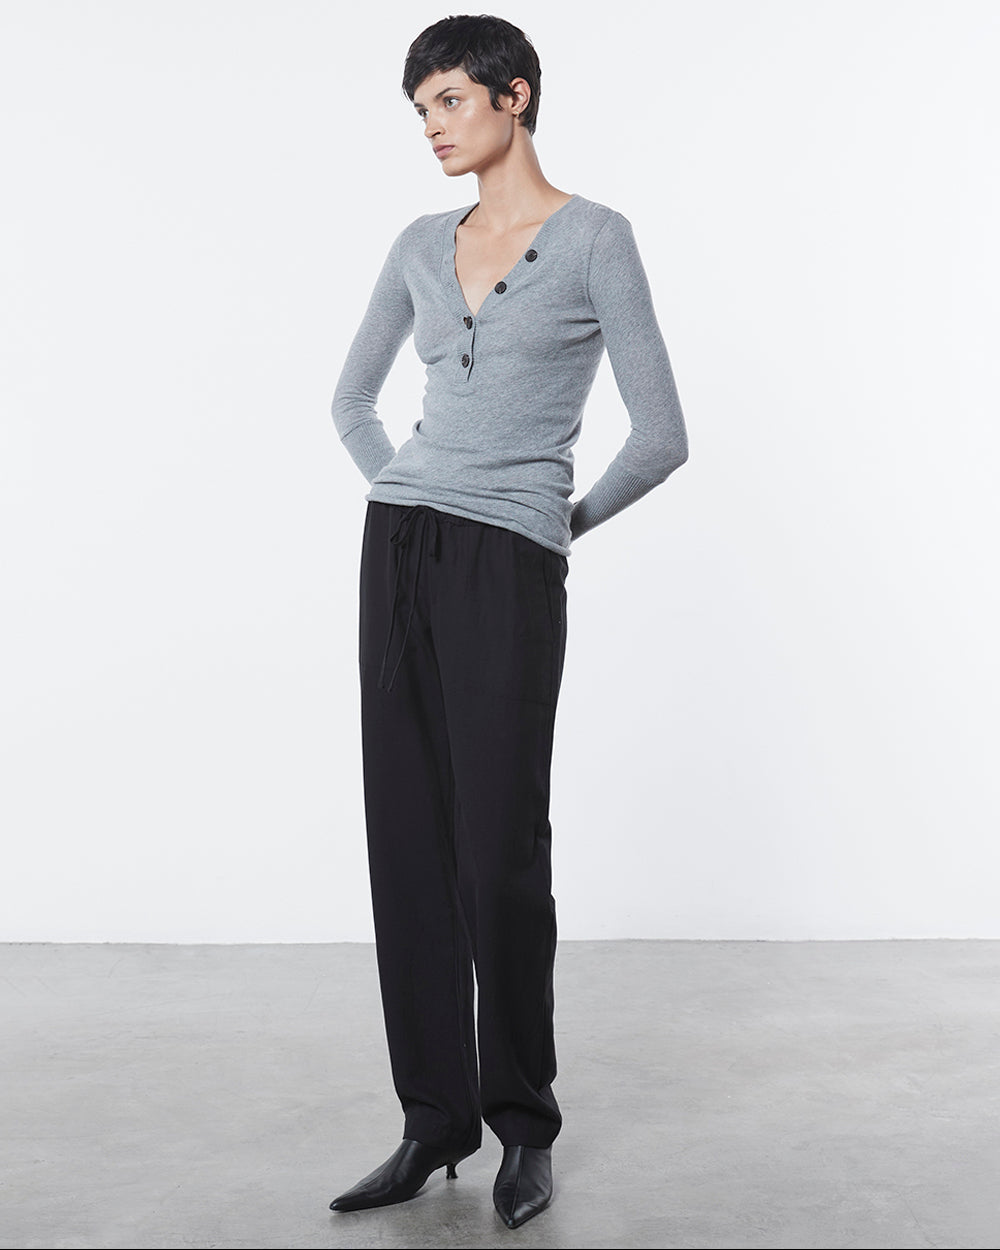 STRATO® Cashmere, Product Categories